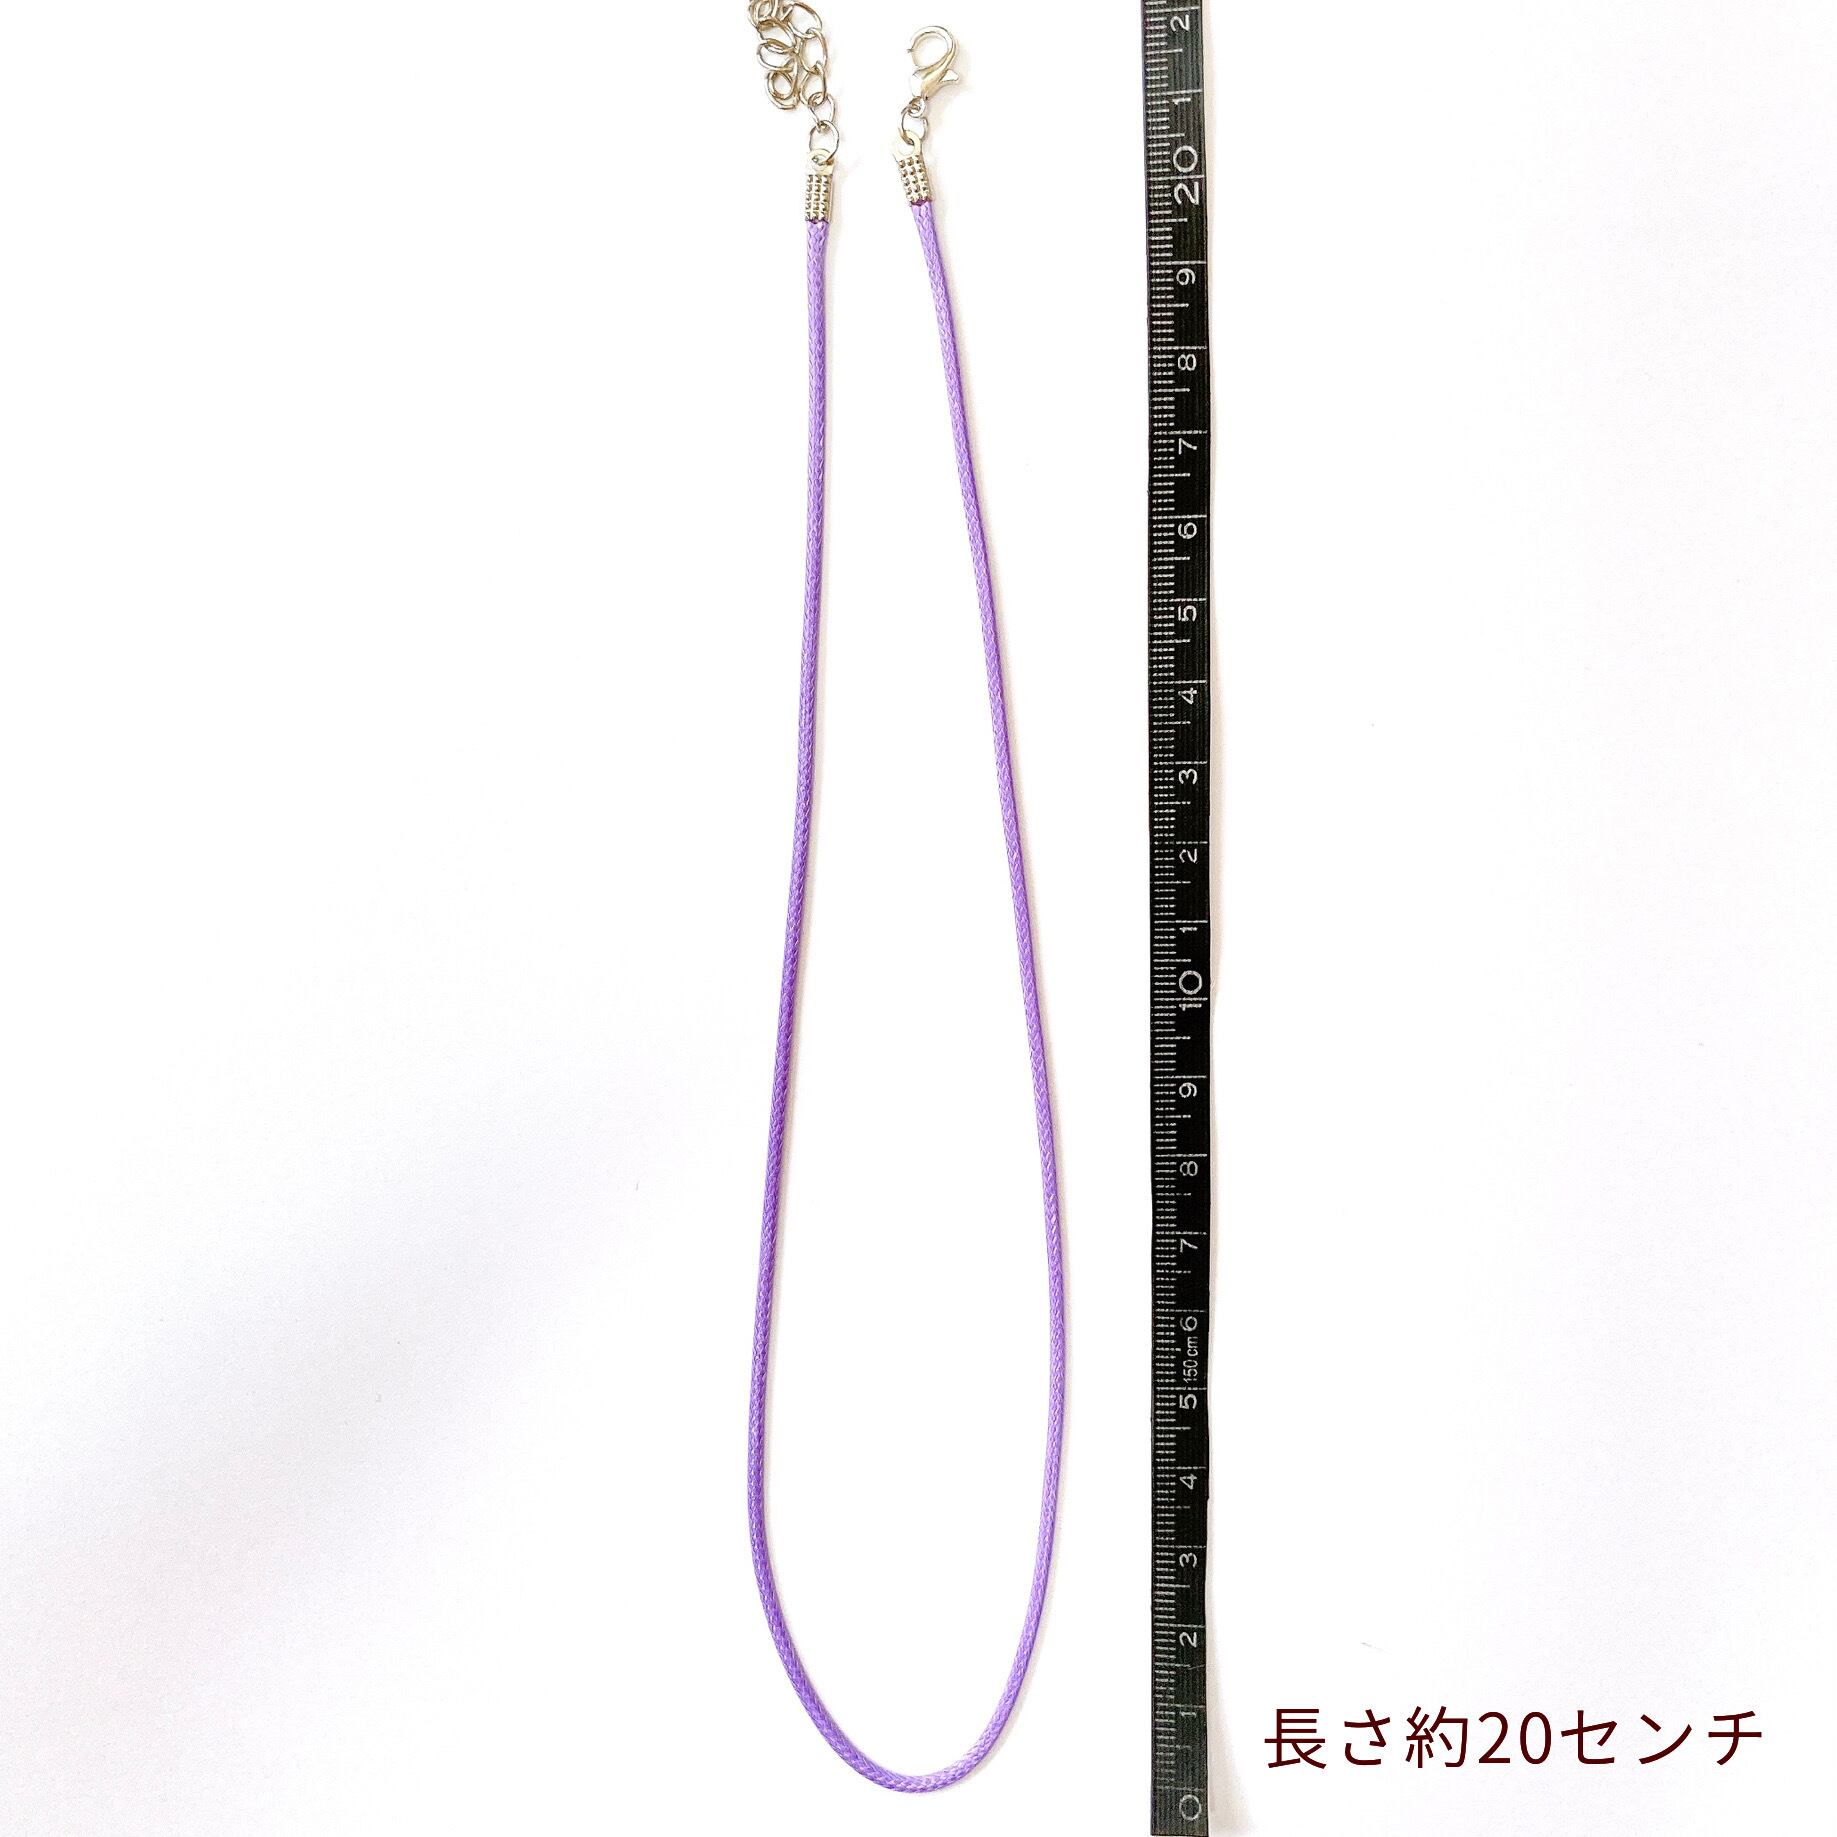 little   necklace  （ c - 3 ）  キッズネックレス